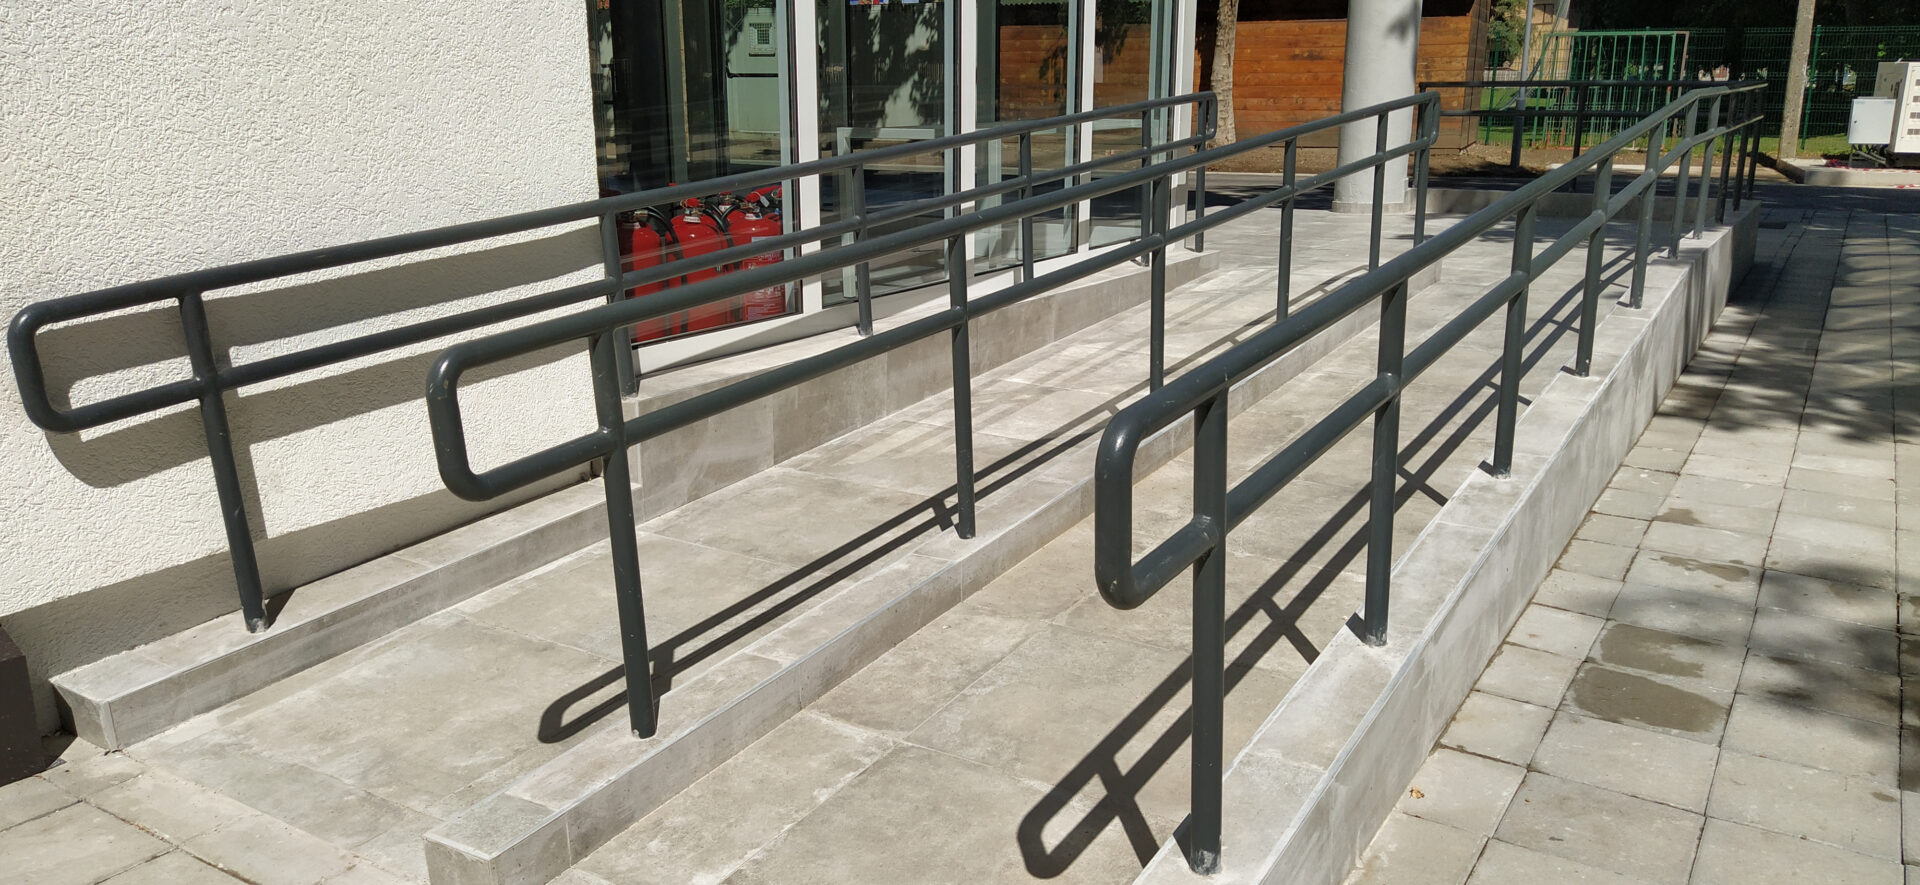 A metal railing on the side of steps.